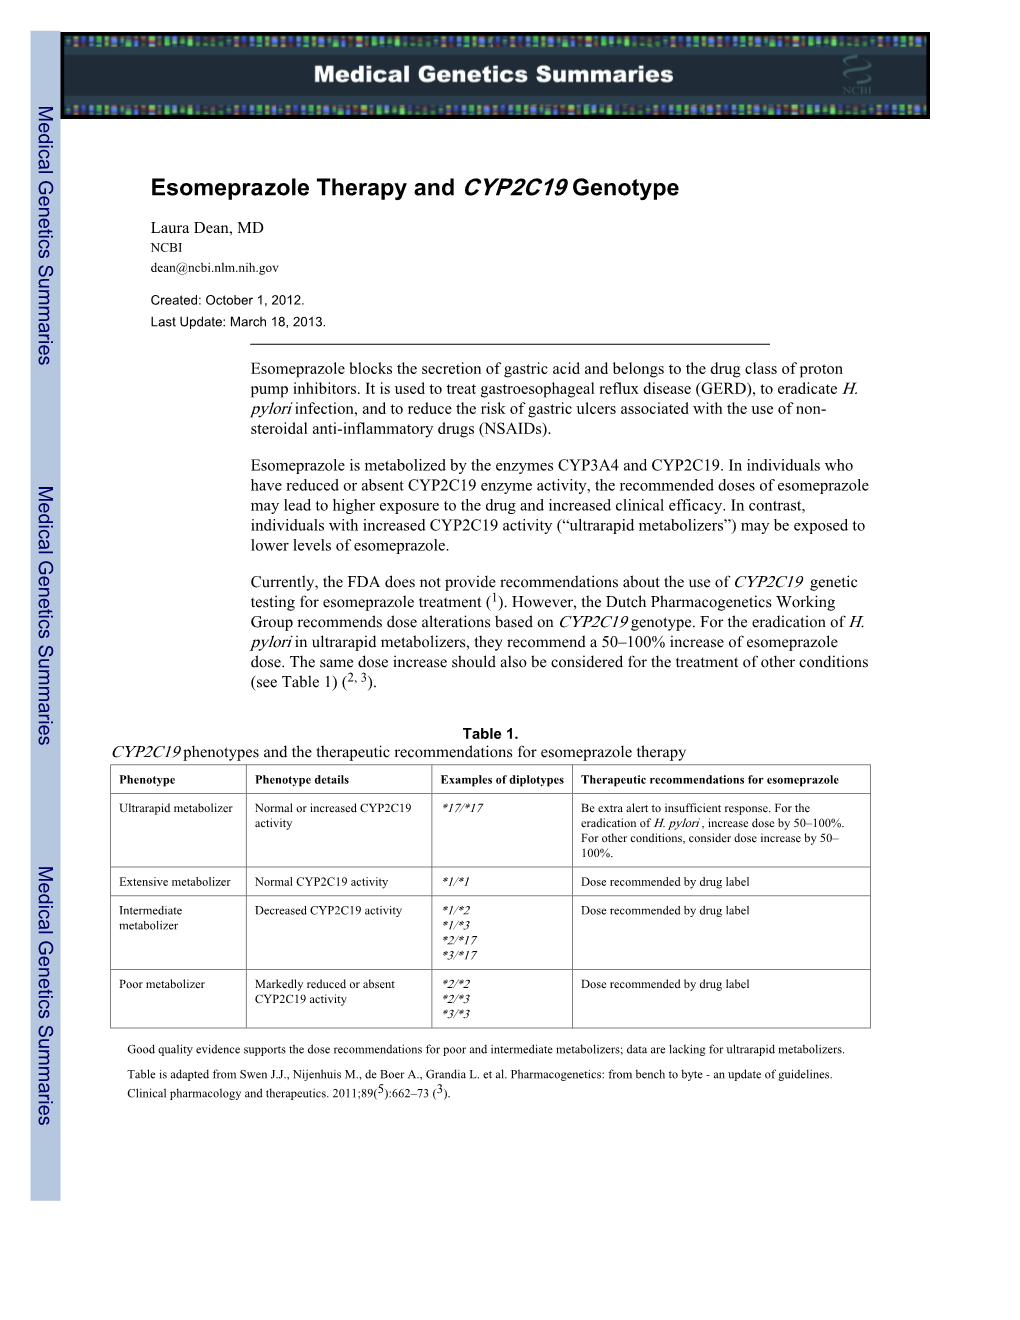 Esomeprazole Therapy and CYP2C19 Genotype